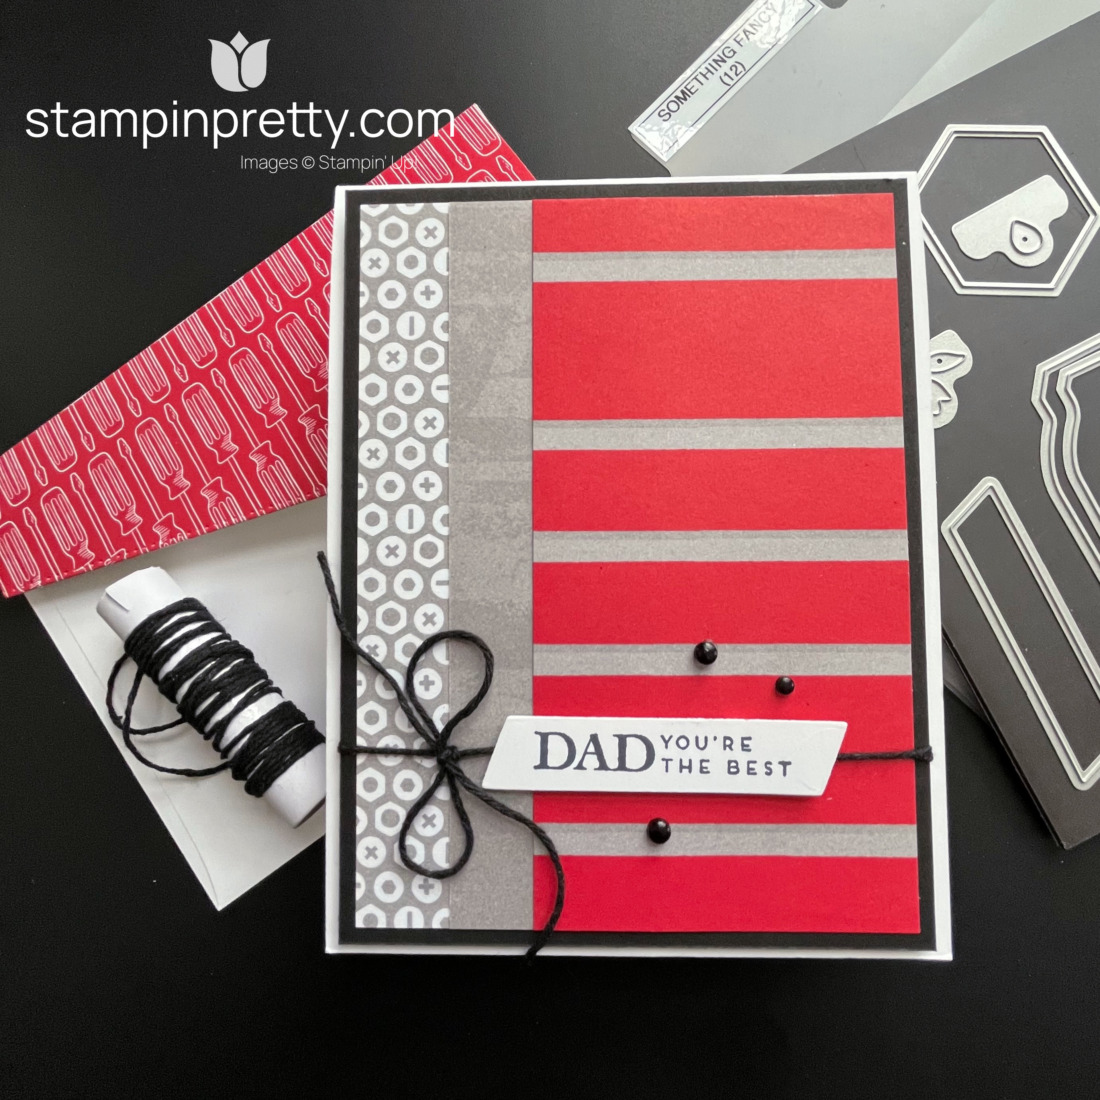 Create a Masculine Birthday Card with the Trusty Toolbox Designer Series Paper from Stampin' Up! Mary Fish, Stampin' Pretty